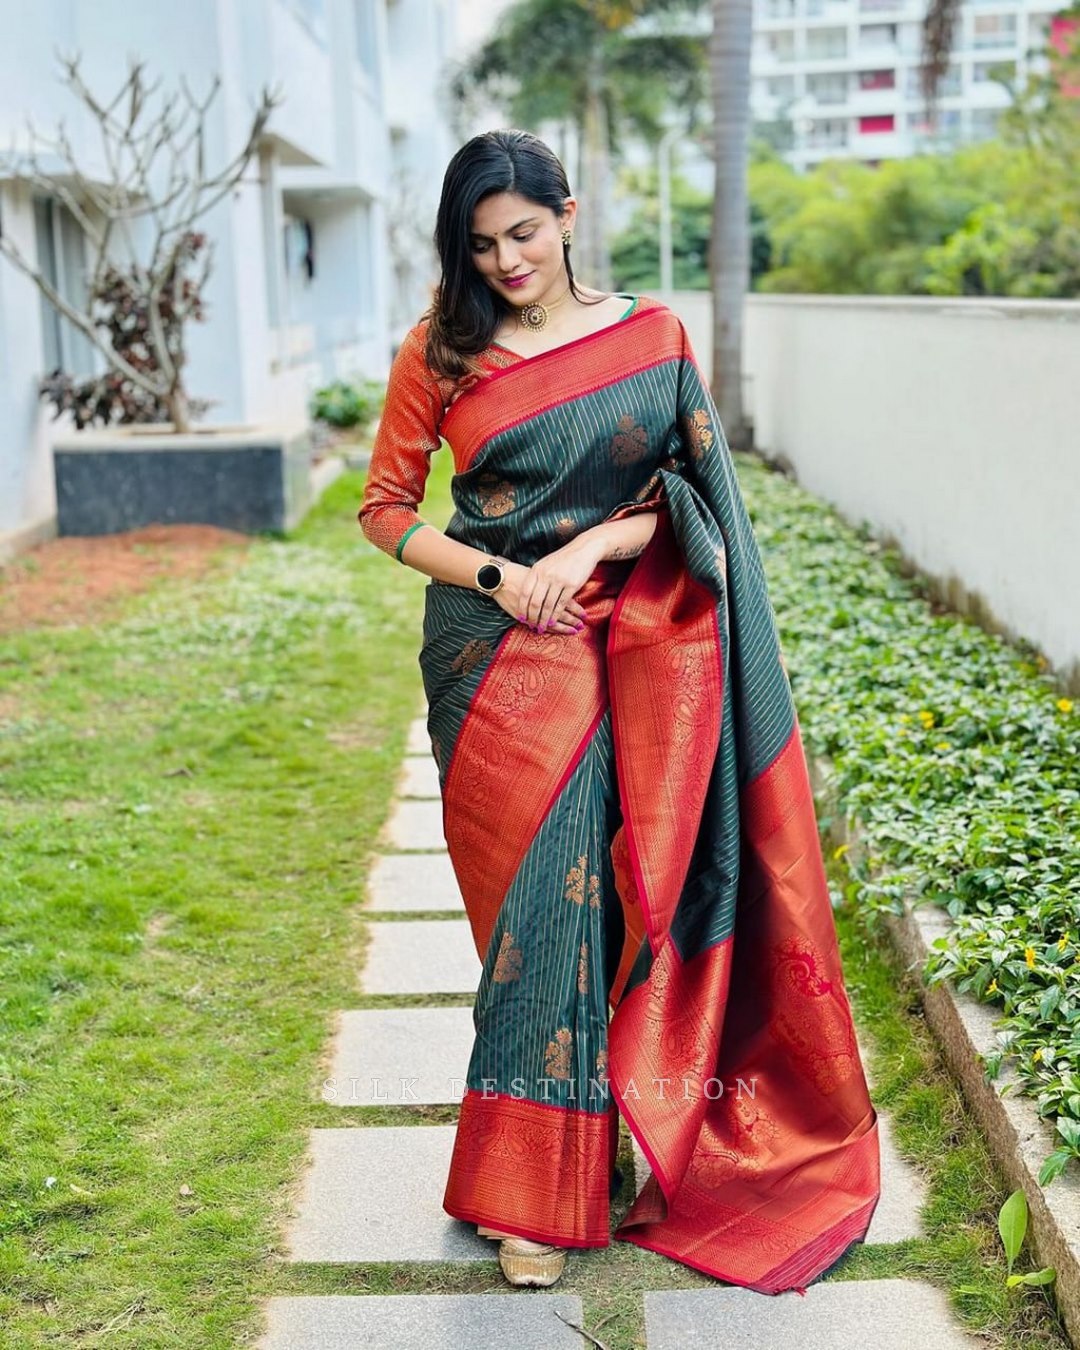 Celestial Elegance: Saree in Ocean Blue, Lined with Misty Gray, Adorned with Earthy Tan Designs, with a Vibrant Coral Pallu and Pallu Graceful Blush